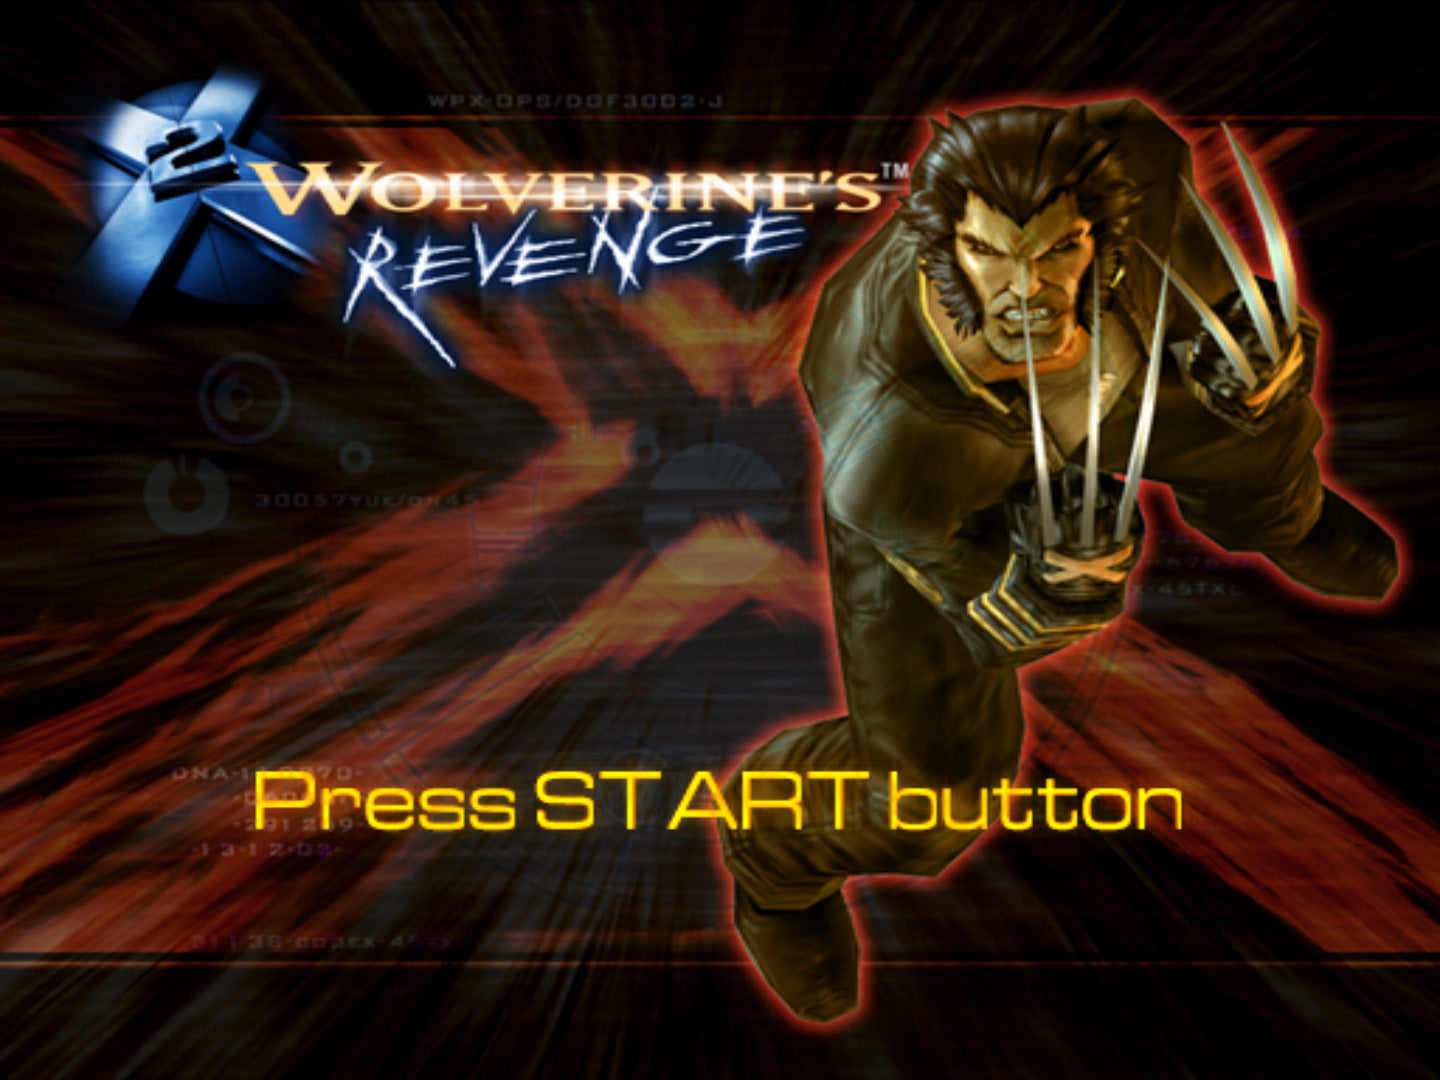 X2: Wolverine's Revenge - PlayStation 2 (PS2) Game